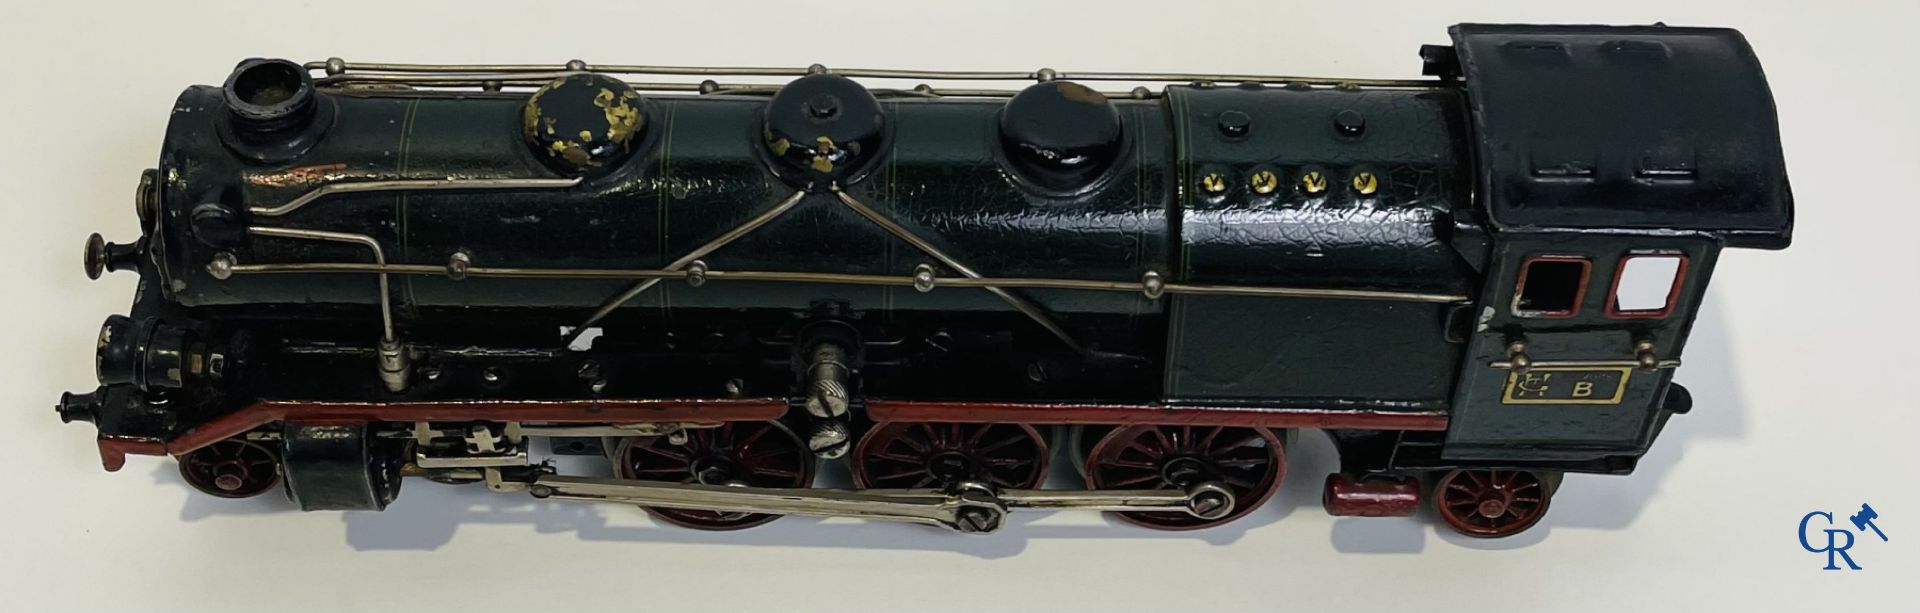 Old toys: Märklin, Locomotive with towing tender and dining car.
About 1930. - Bild 4 aus 32